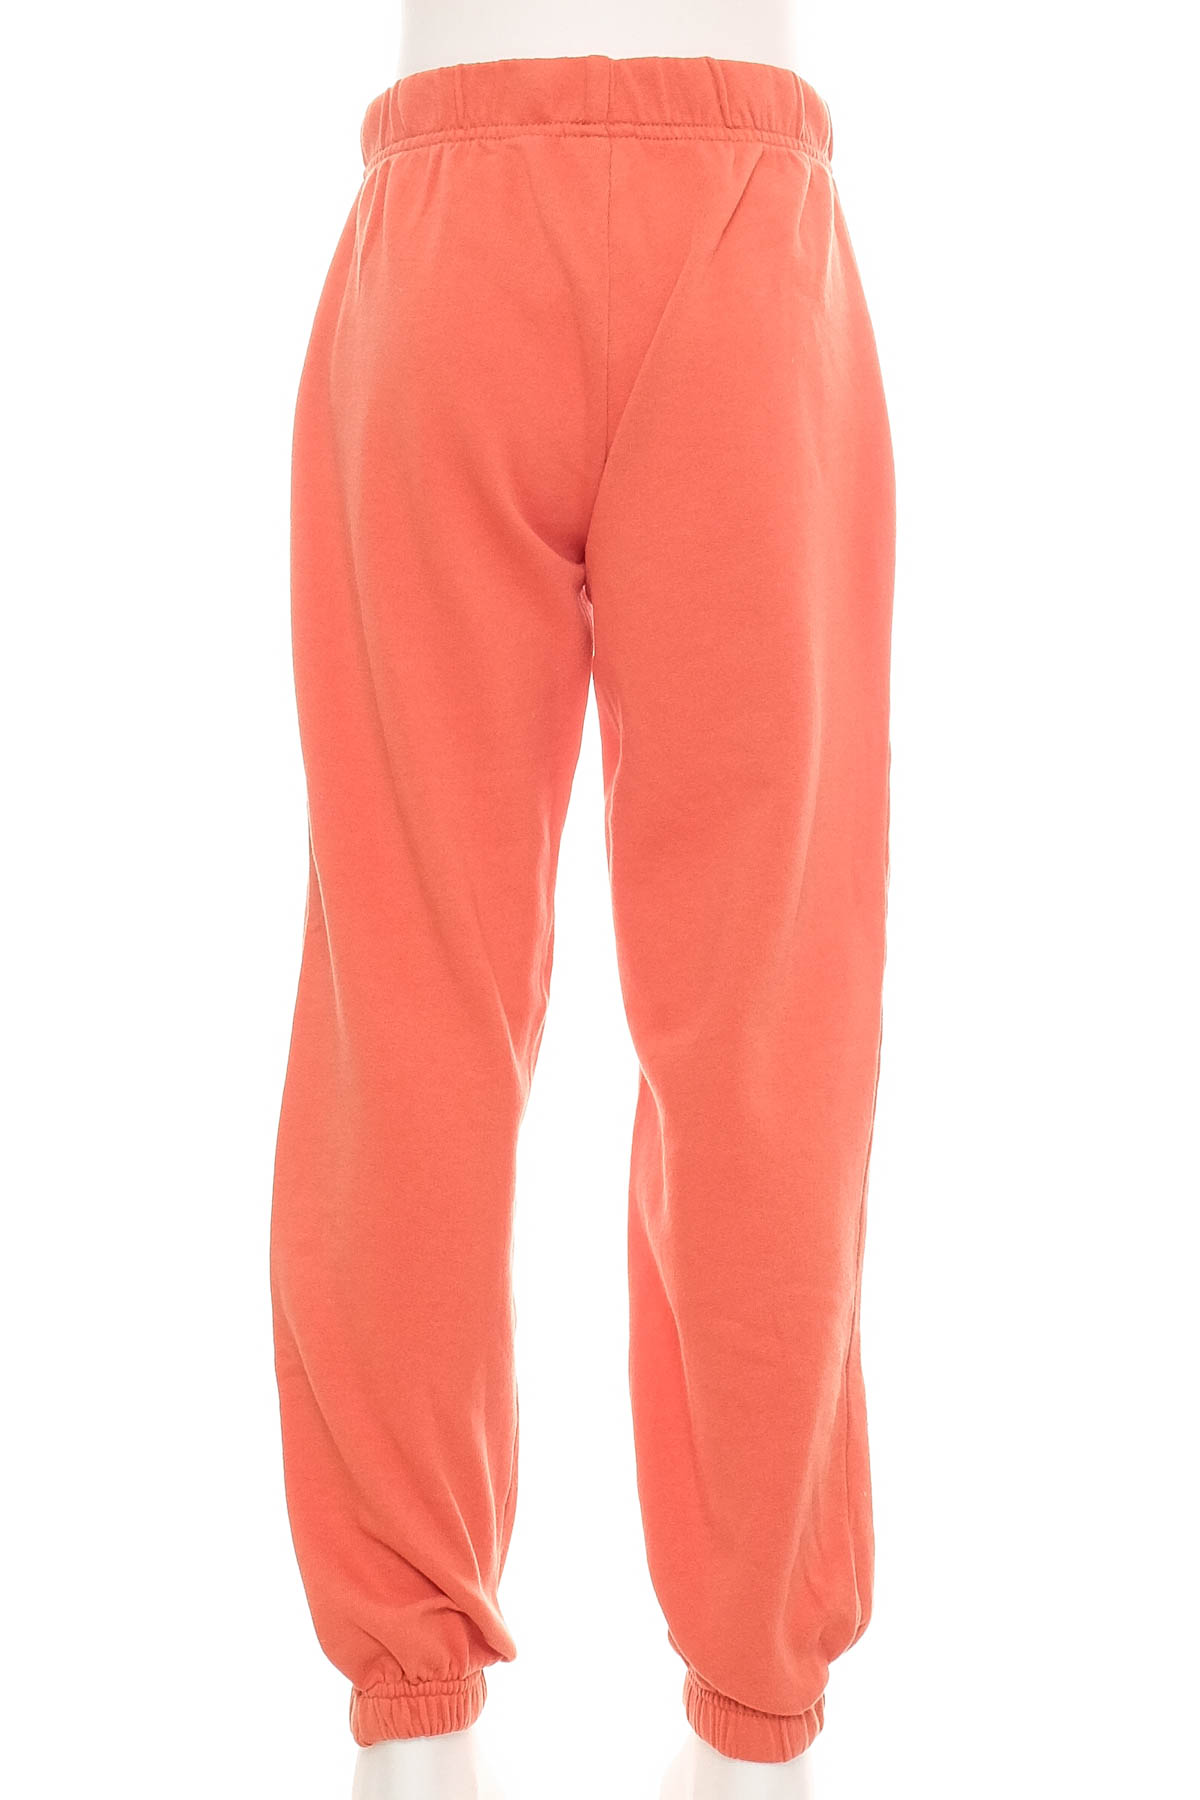 Trousers for girl - Gina Tricot - 1